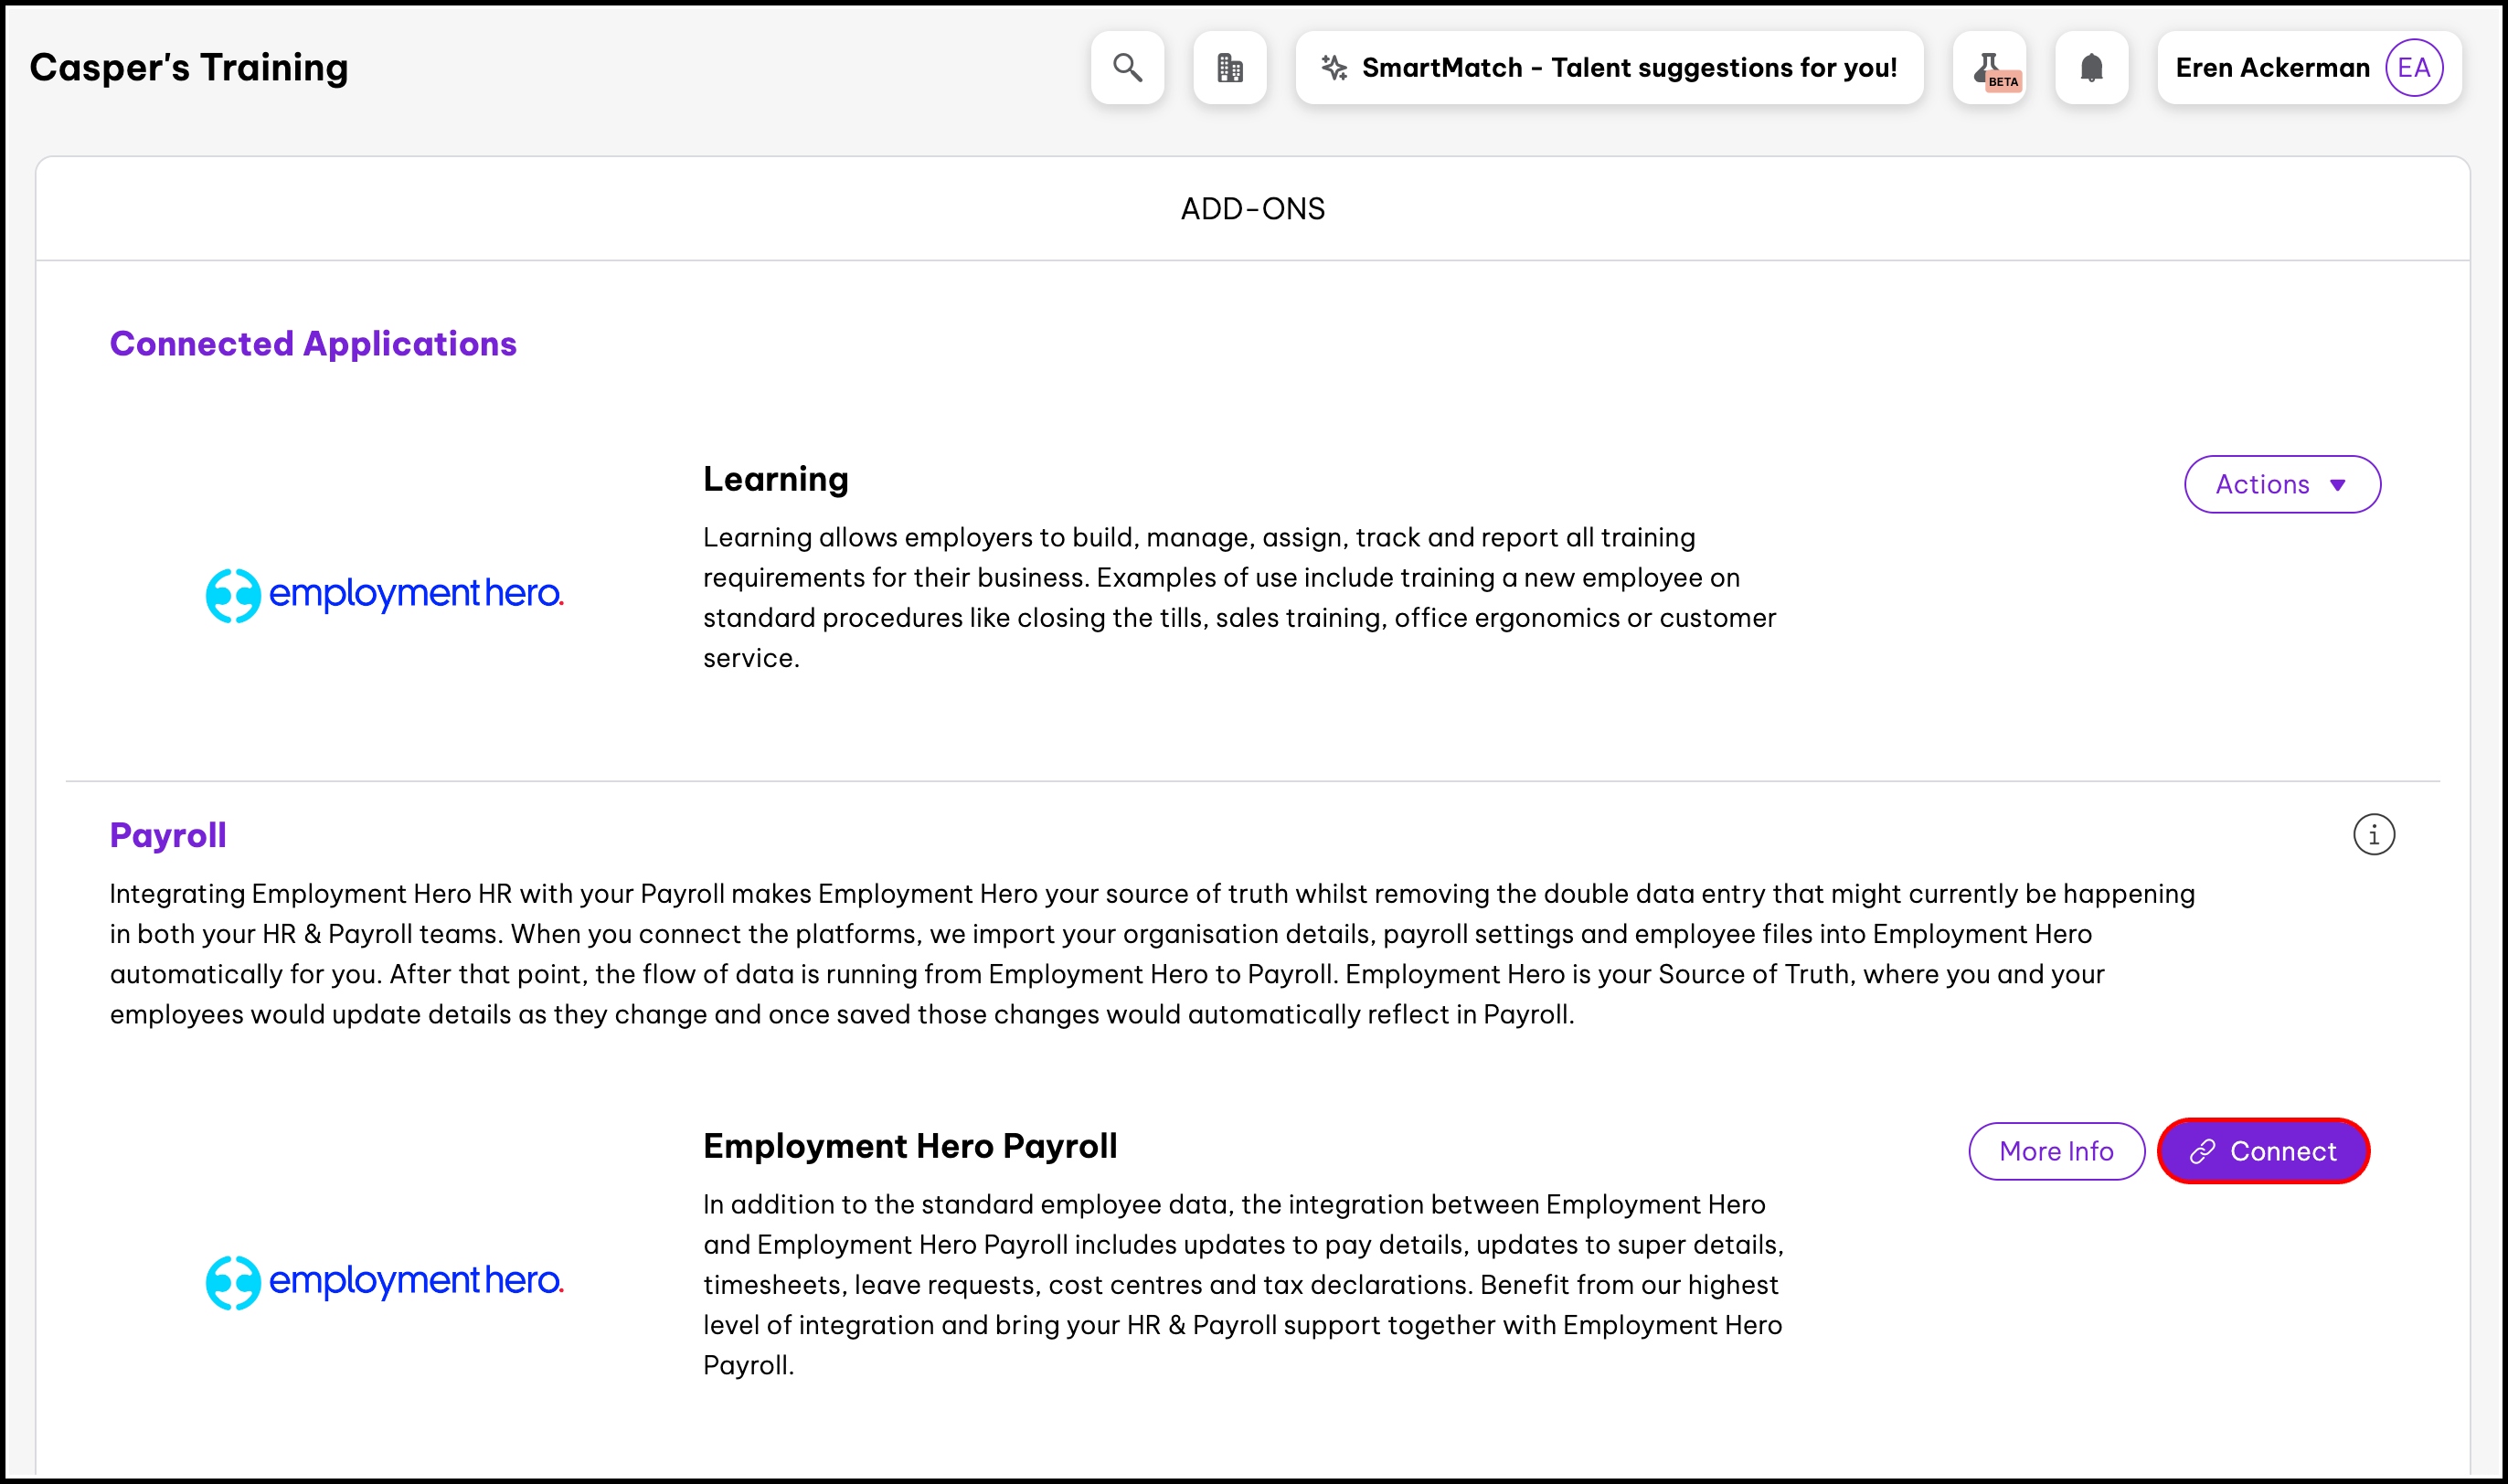 screenshot of the add-ons page, highlighting the connect button for employment hero payroll